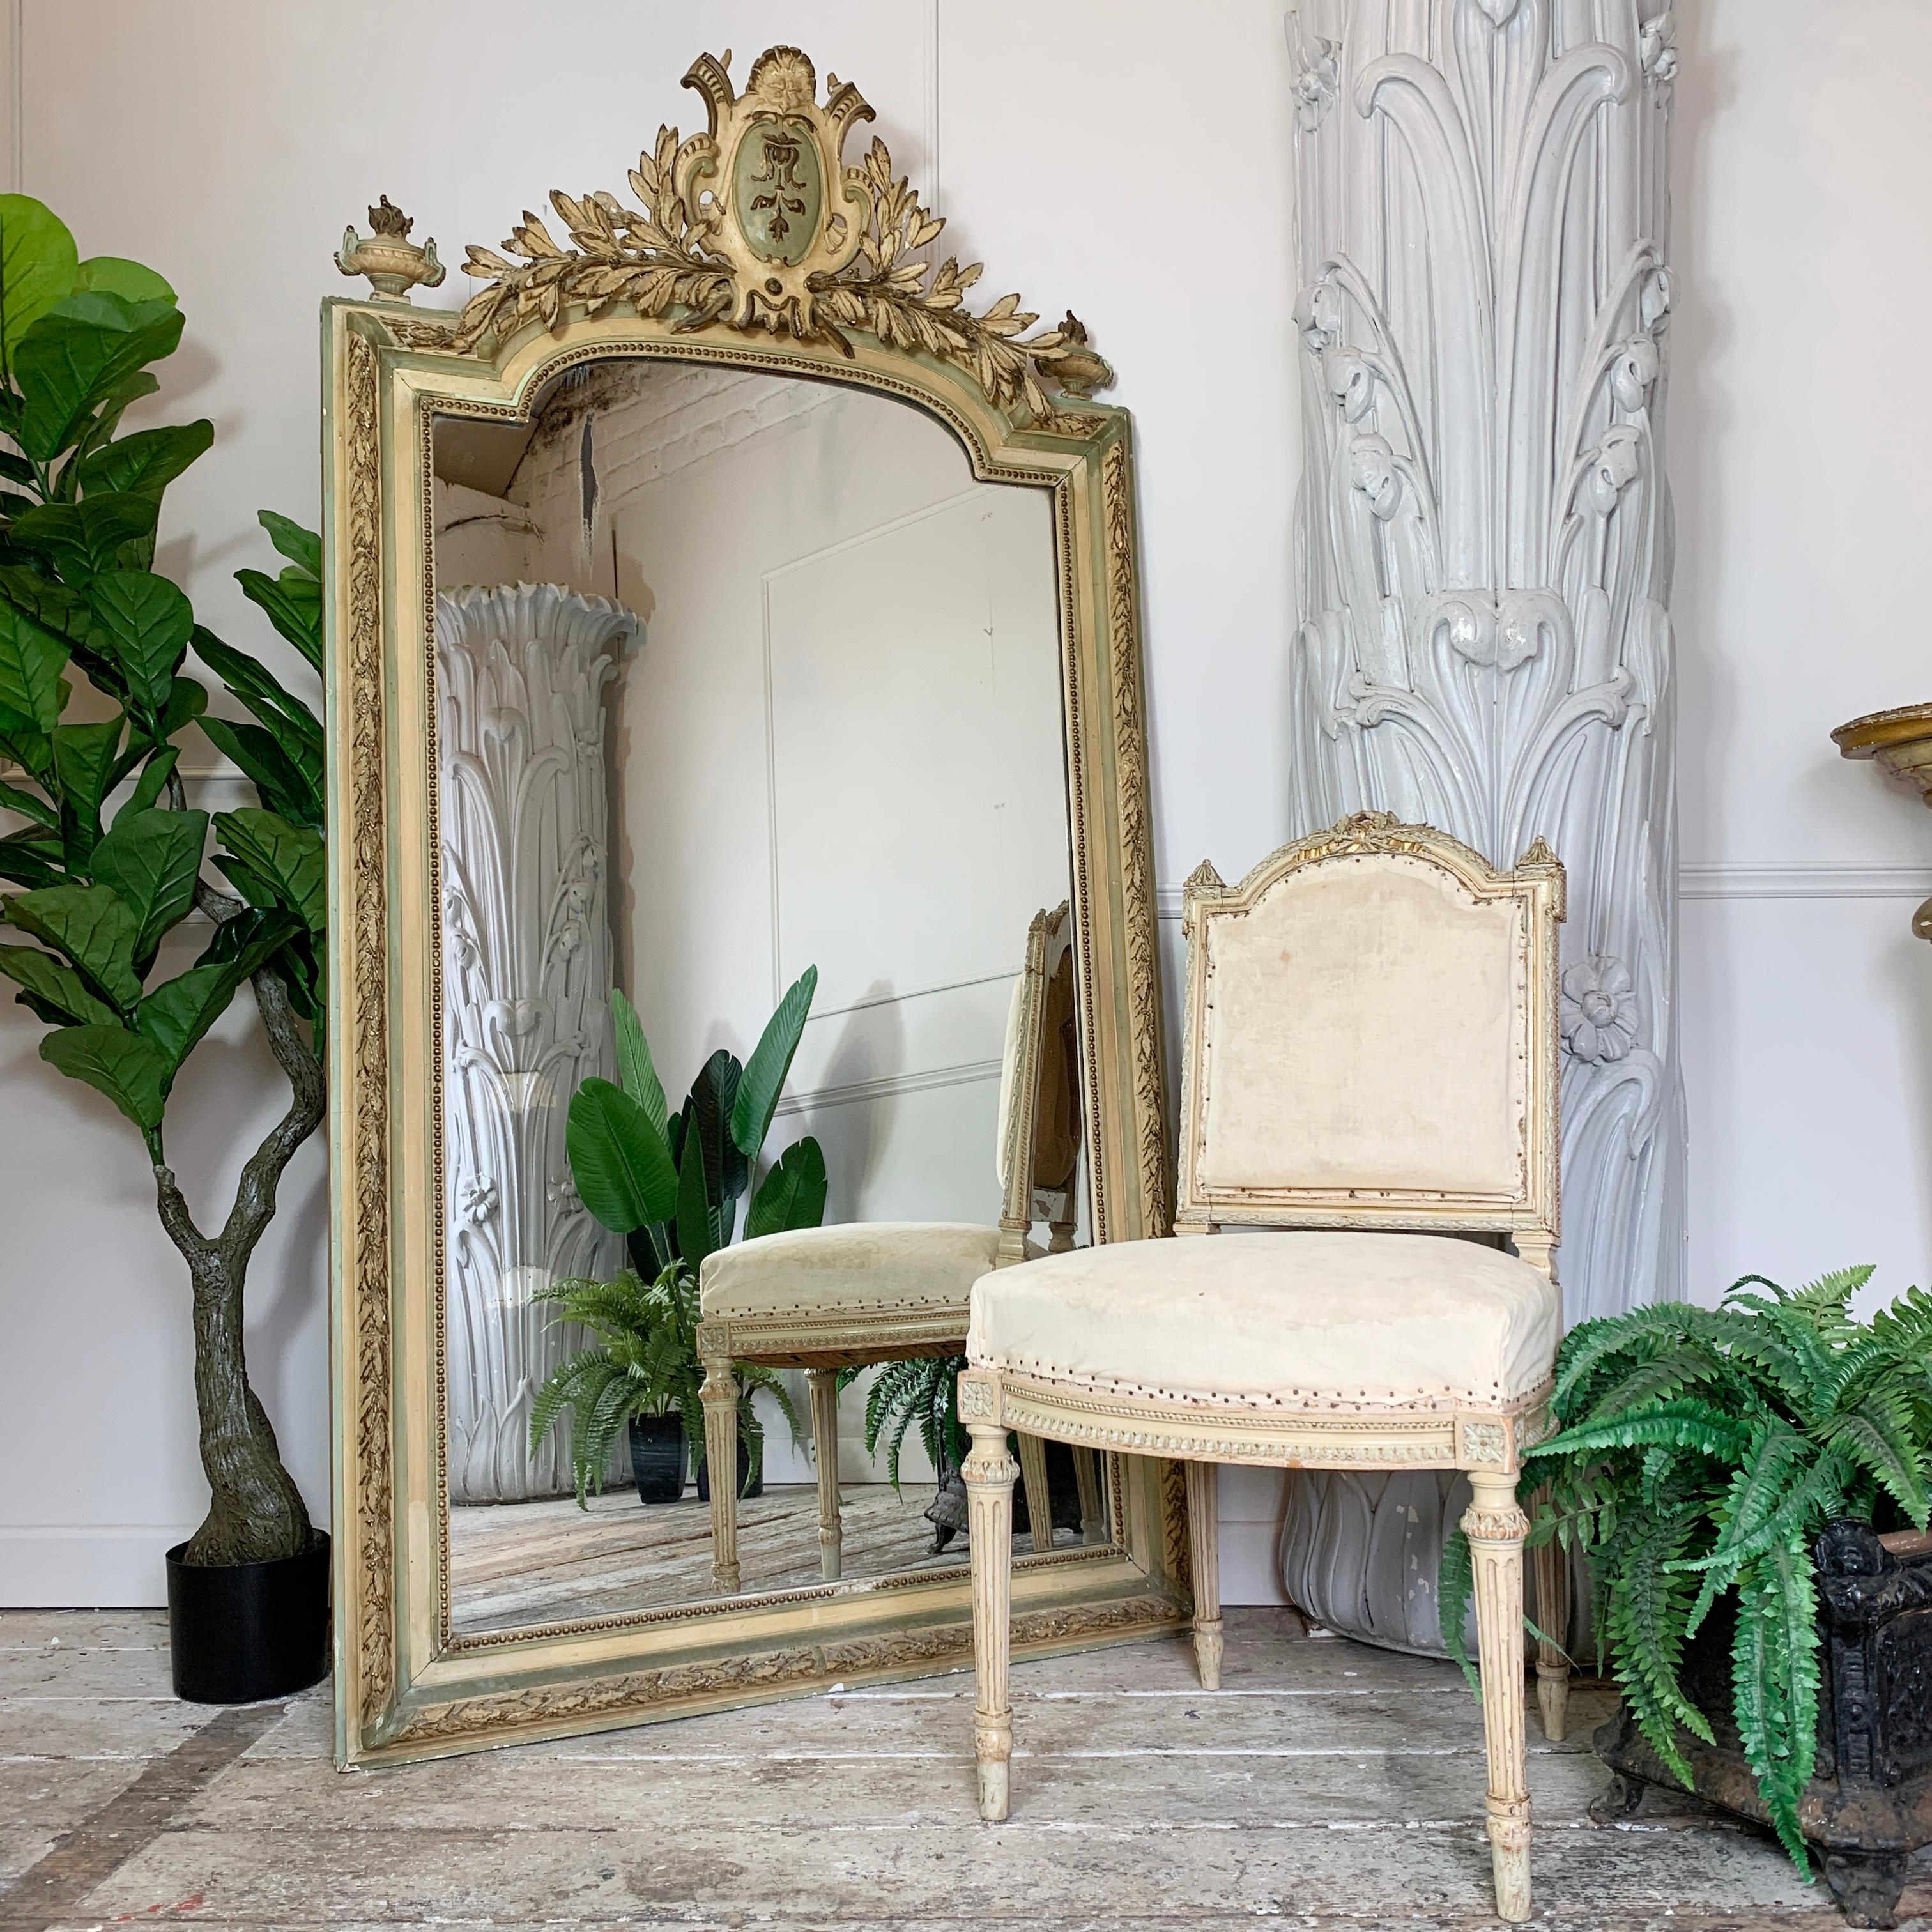 A truly exceptional, and beautiful very large crested French mirror, dating to the early 19th century, this mirror was removed from a chateau in the west of France, overall it is in superb condition, with only a few minor losses of the gesso. The